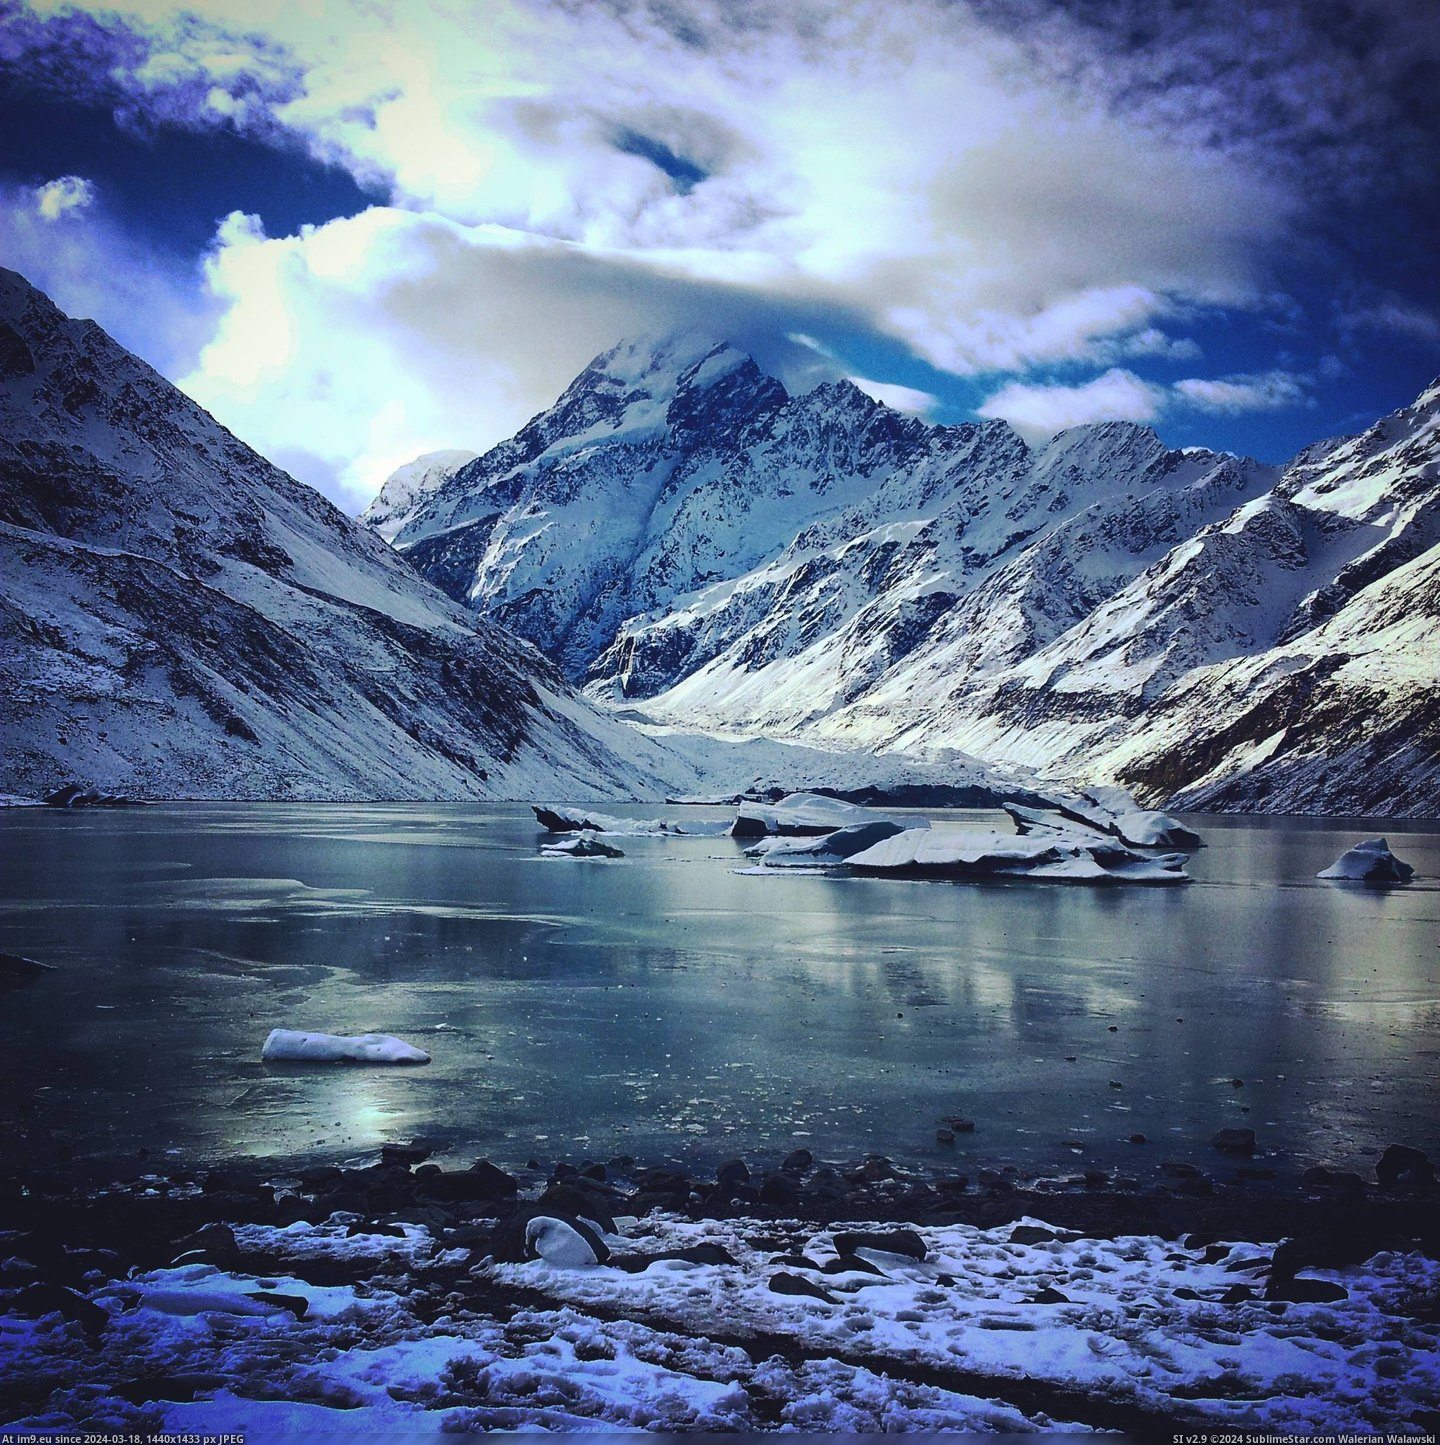 #Hooker #Lake #End #Frozen #Track #Cook #Valley #Mount #Zealand [Earthporn] The frozen lake at the end of the Hooker Valley track, Mount Cook, New Zealand [2448x2448px] Pic. (Obraz z album My r/EARTHPORN favs))